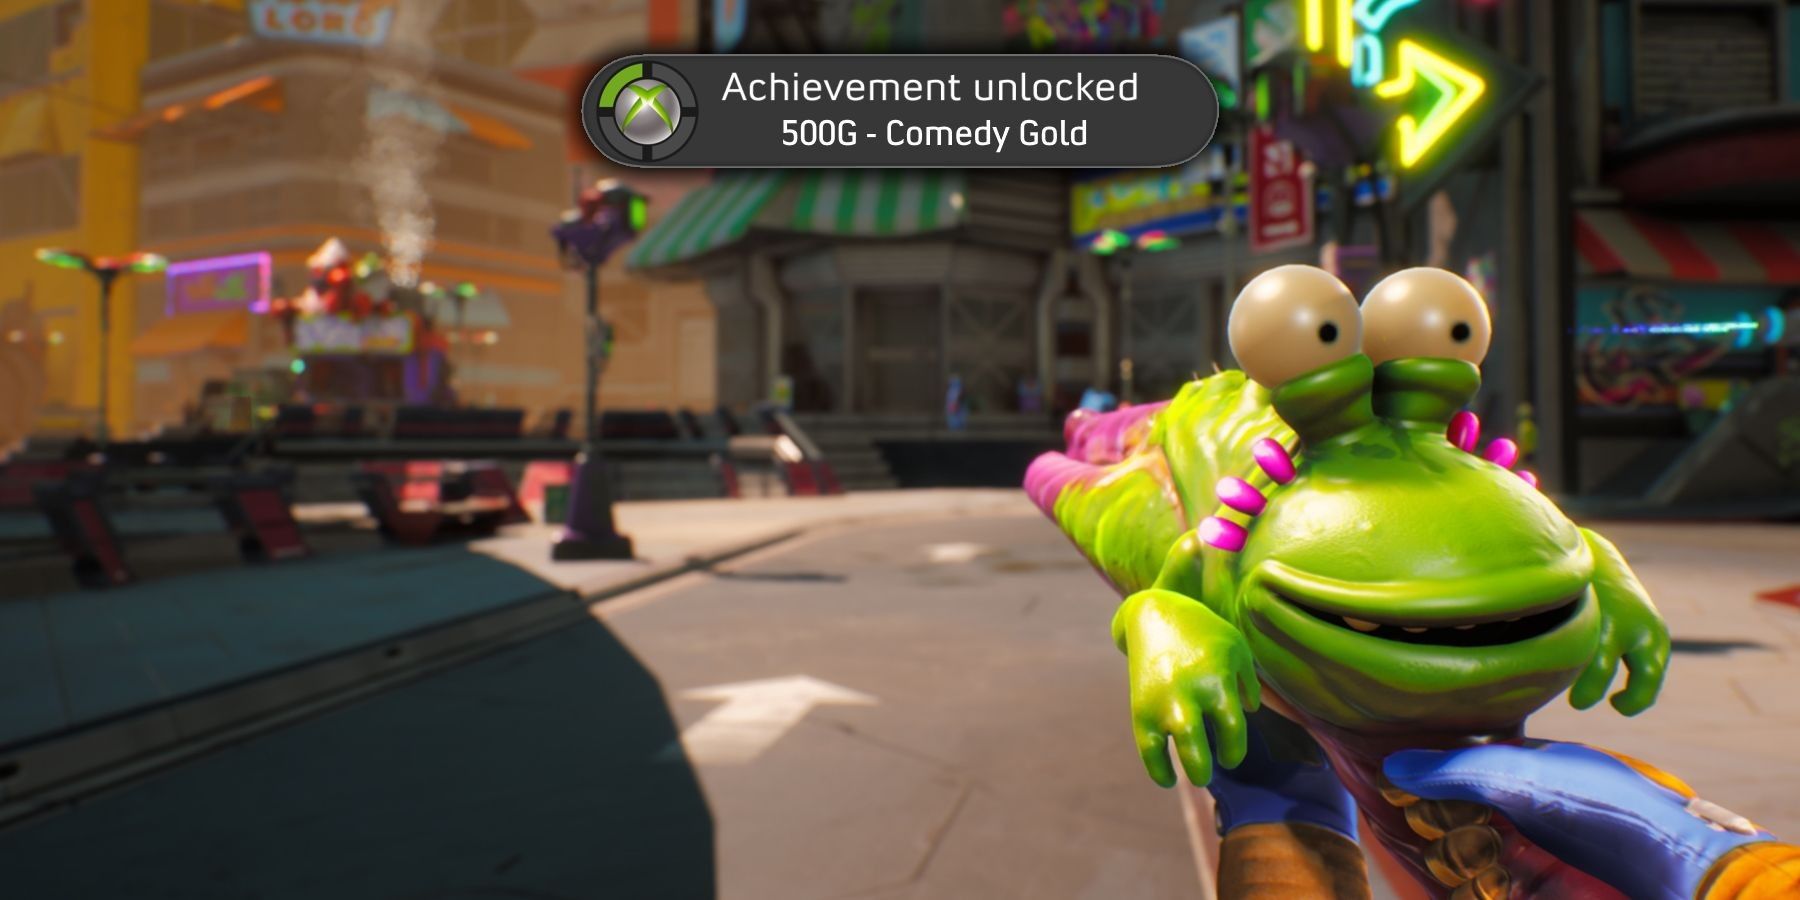 High on Life Will Use Achievements for Comedy